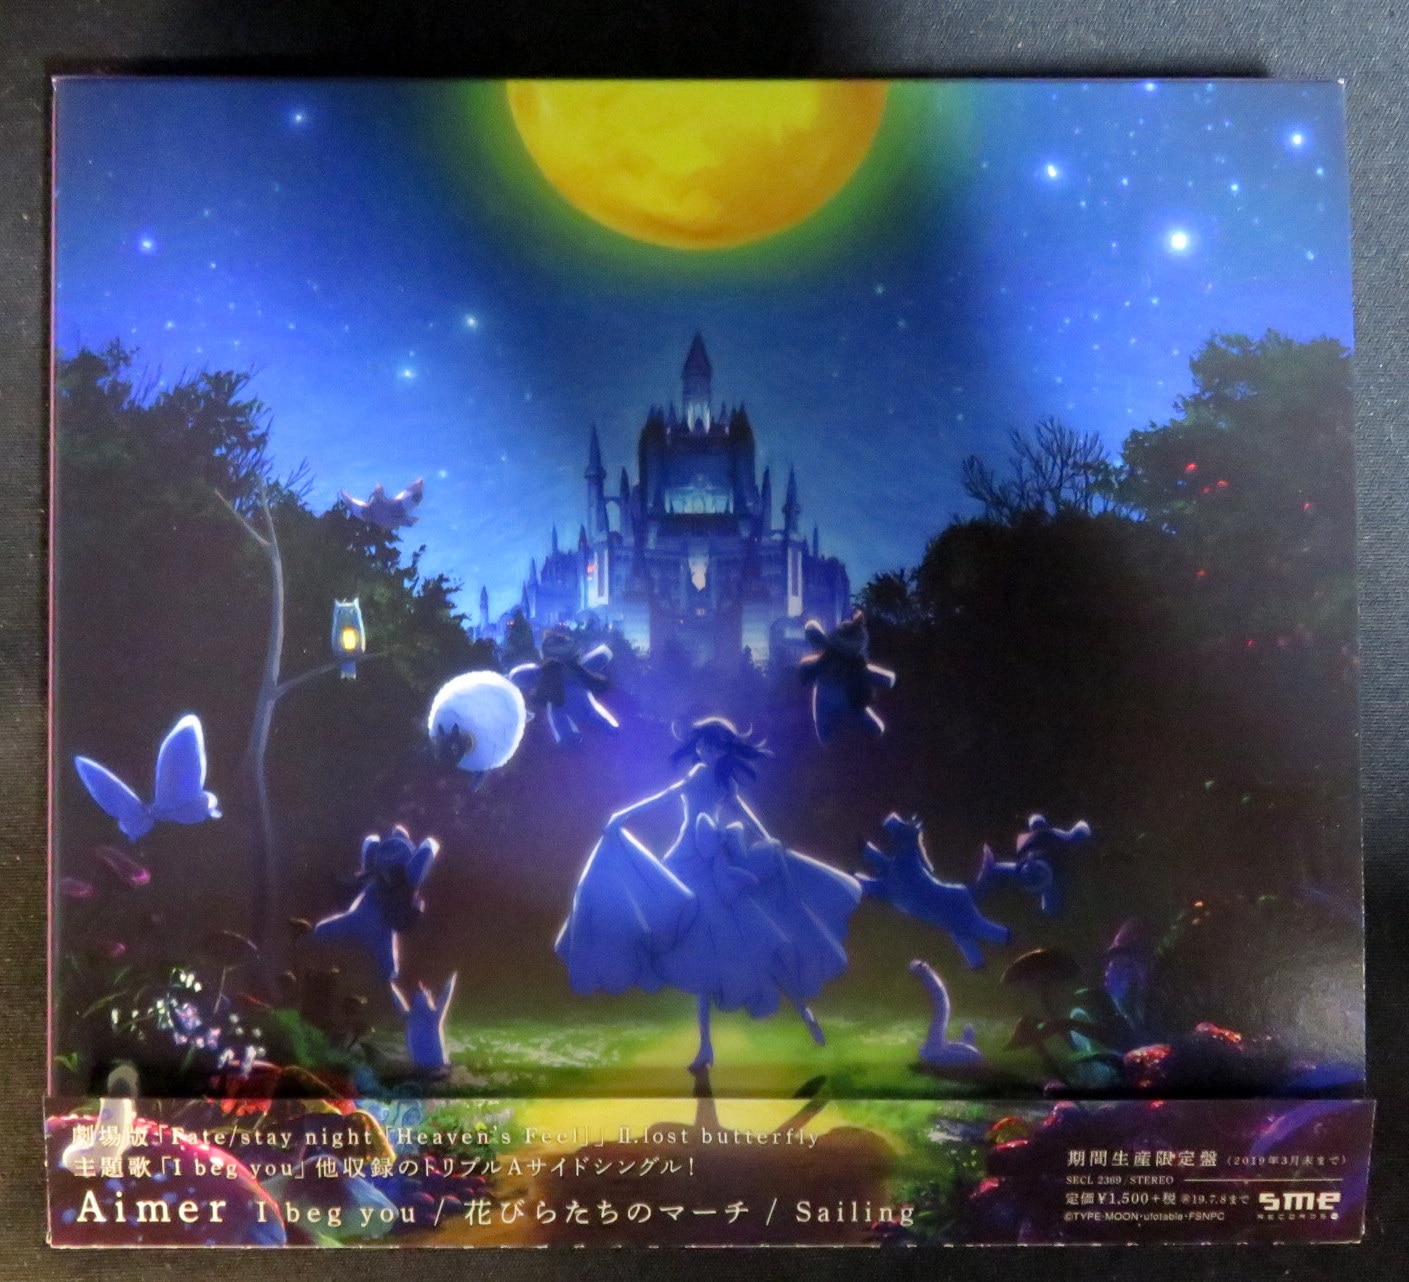 Anime CD Limited Edition Aimer / I beg you Fate / stay night 